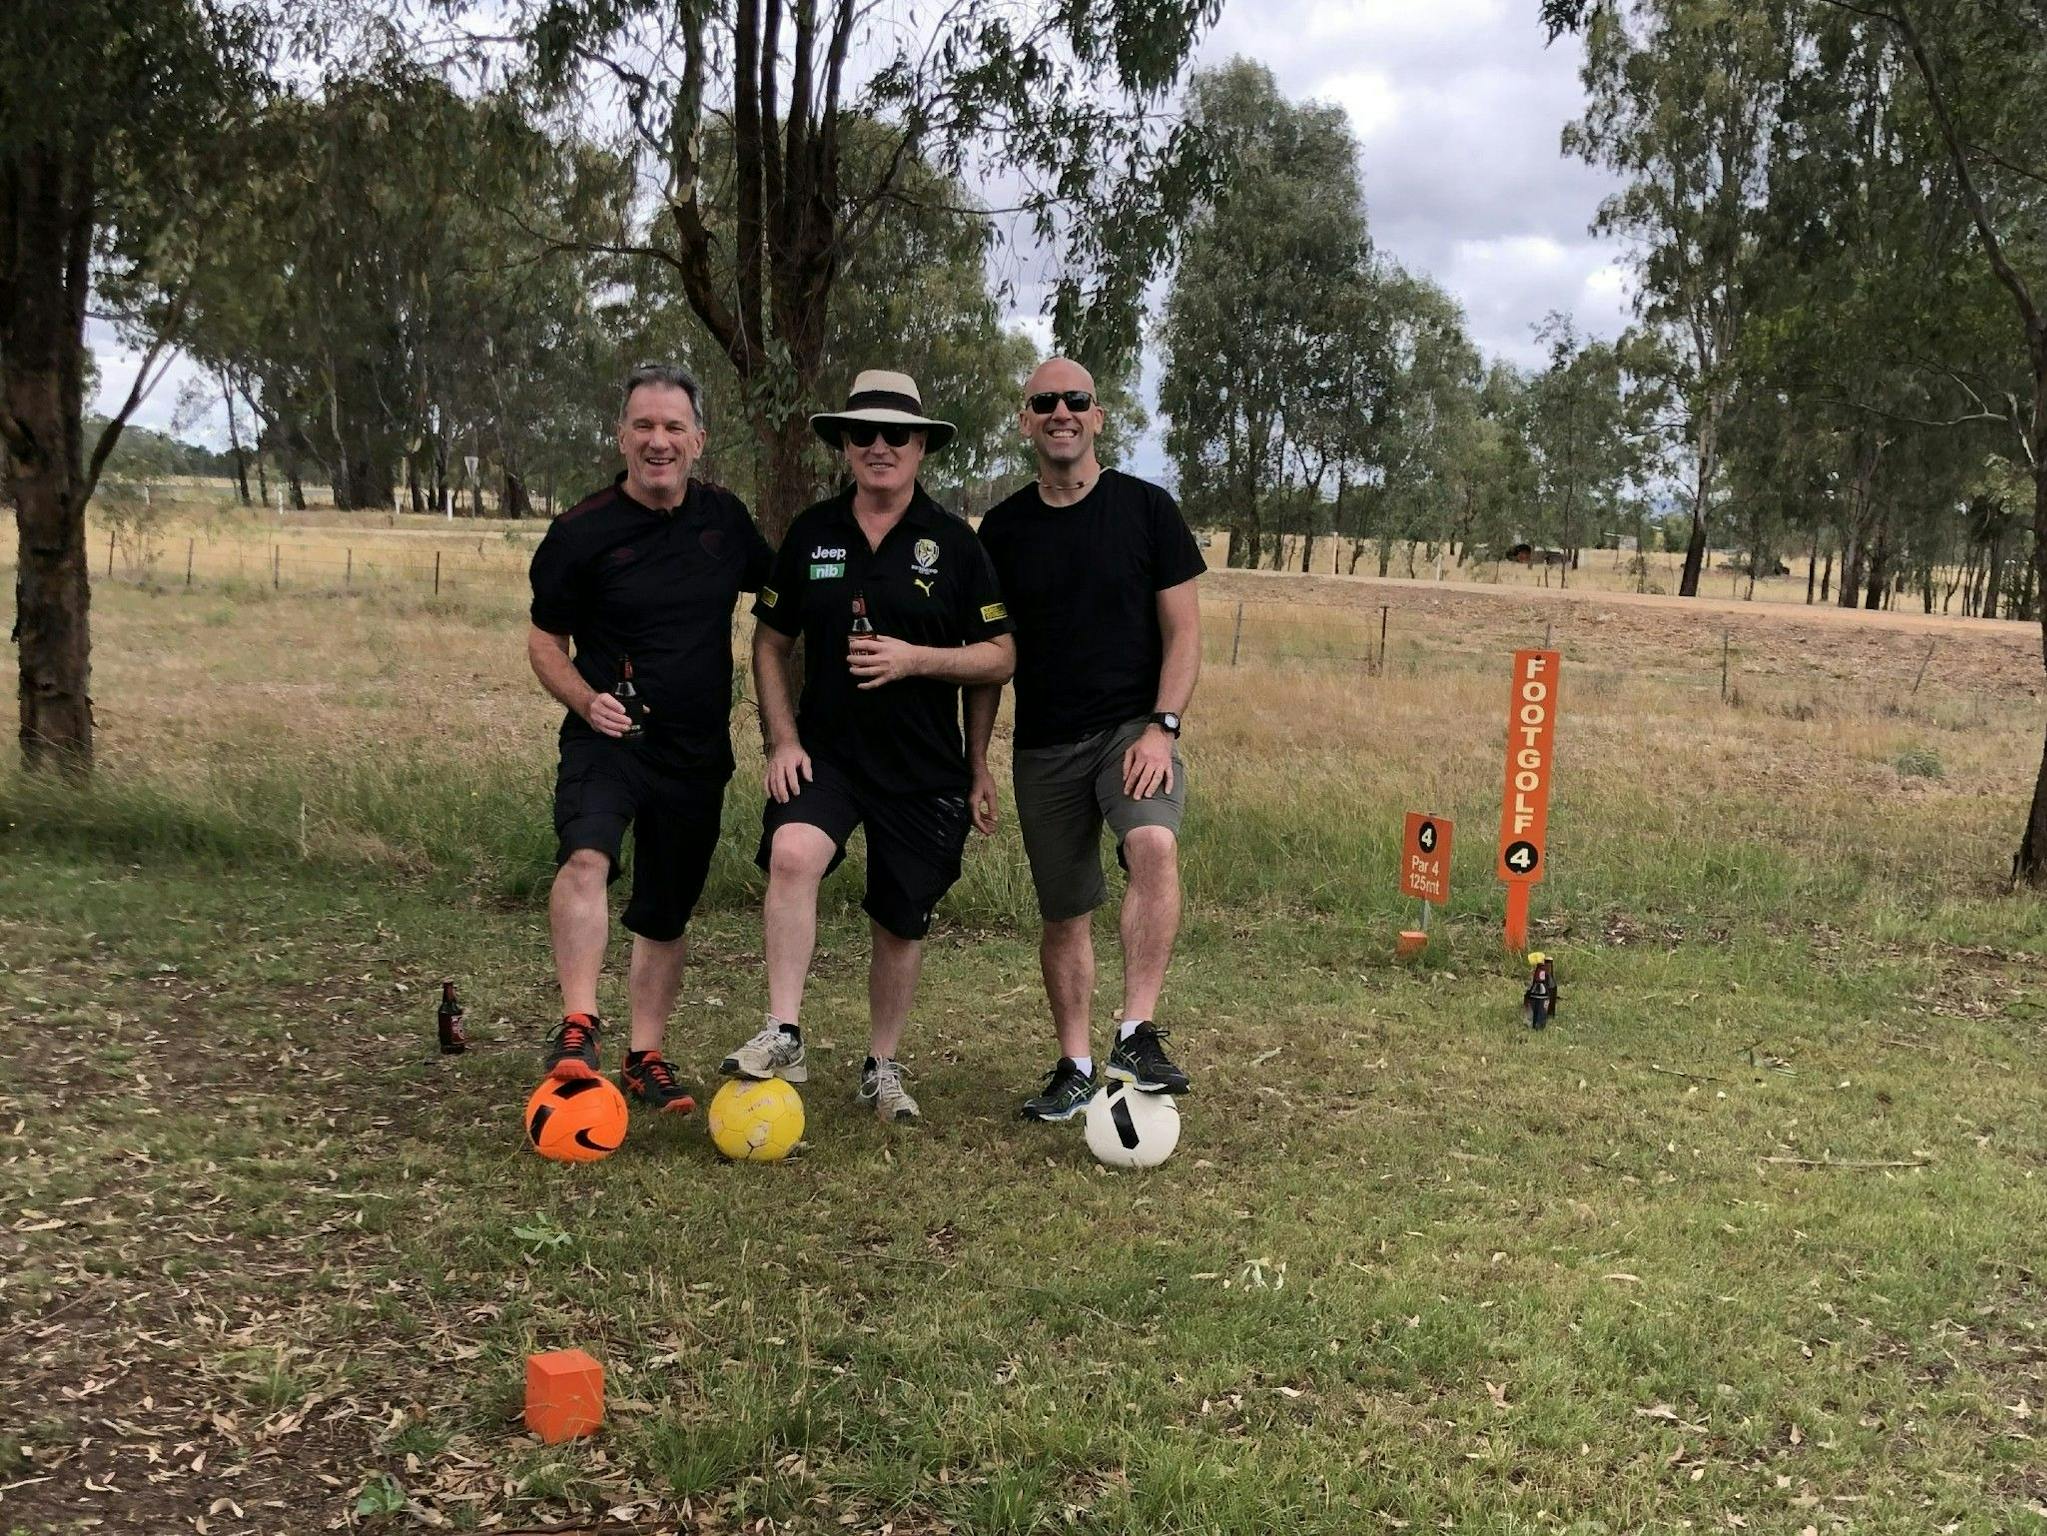 grab some mates and have a round of footgolf